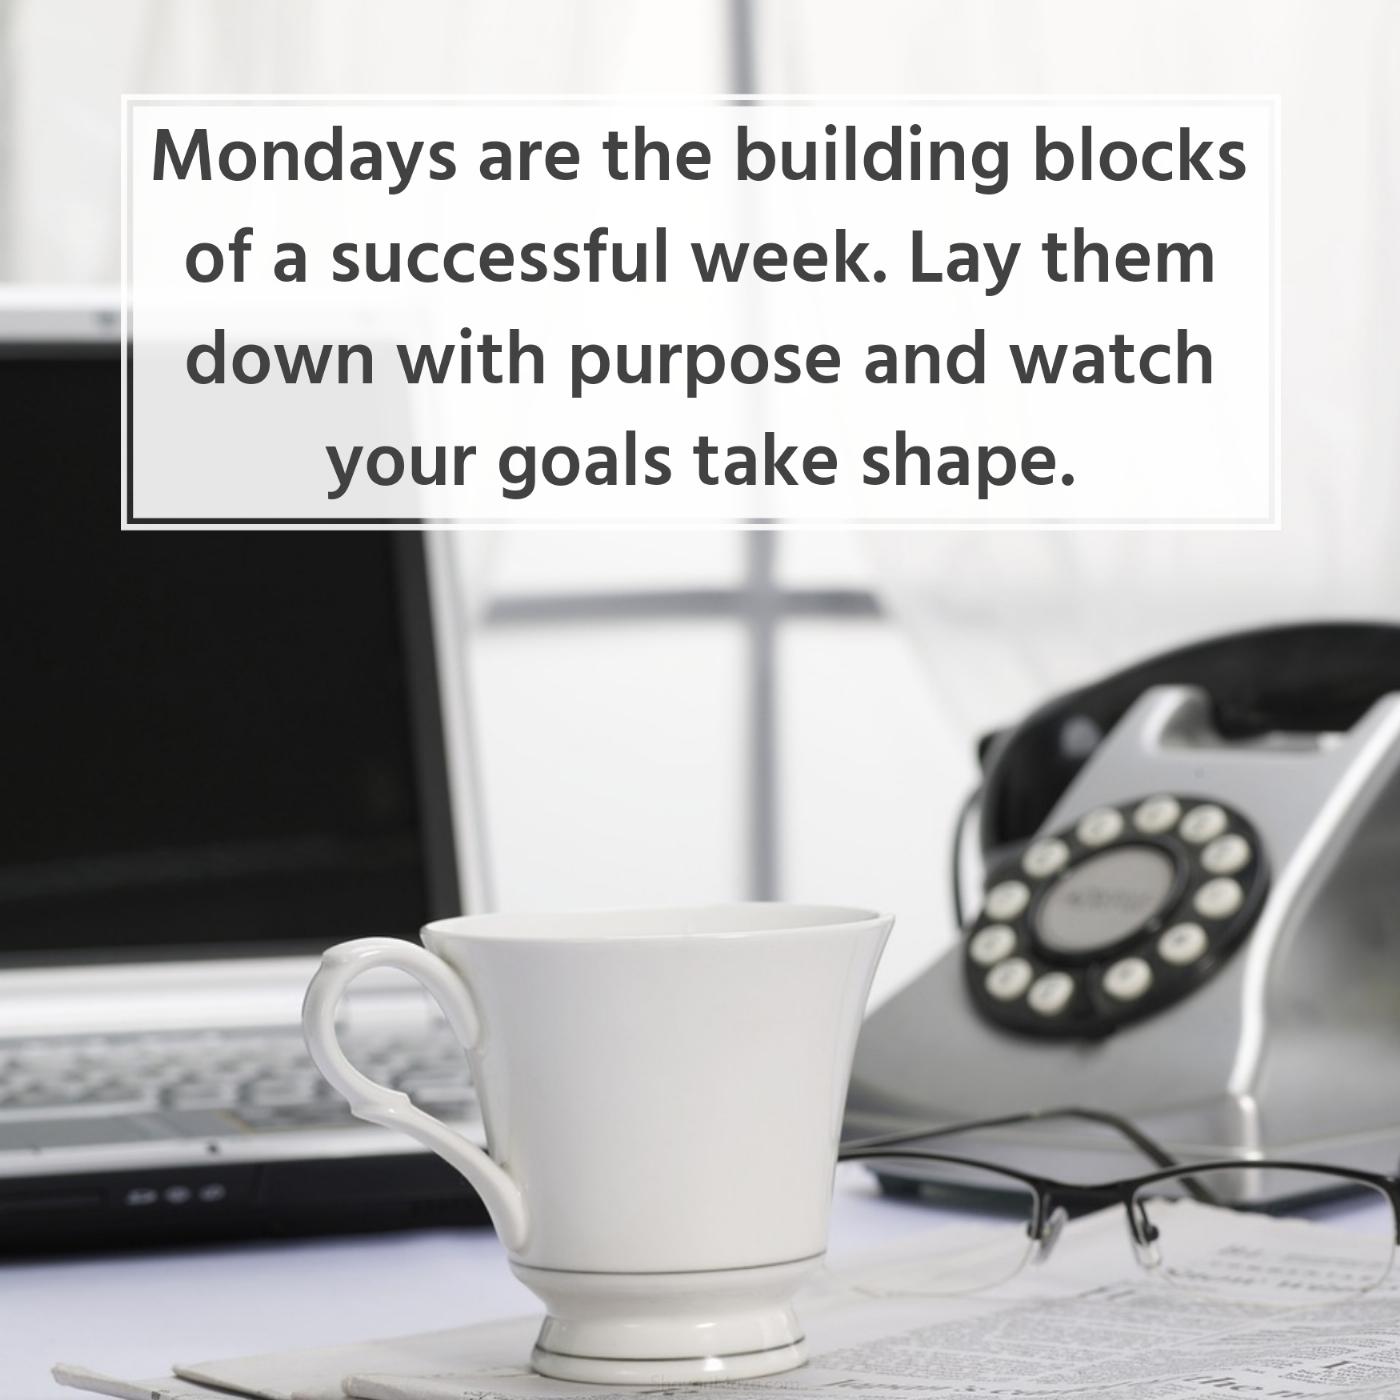 Mondays are the building blocks of a successful week